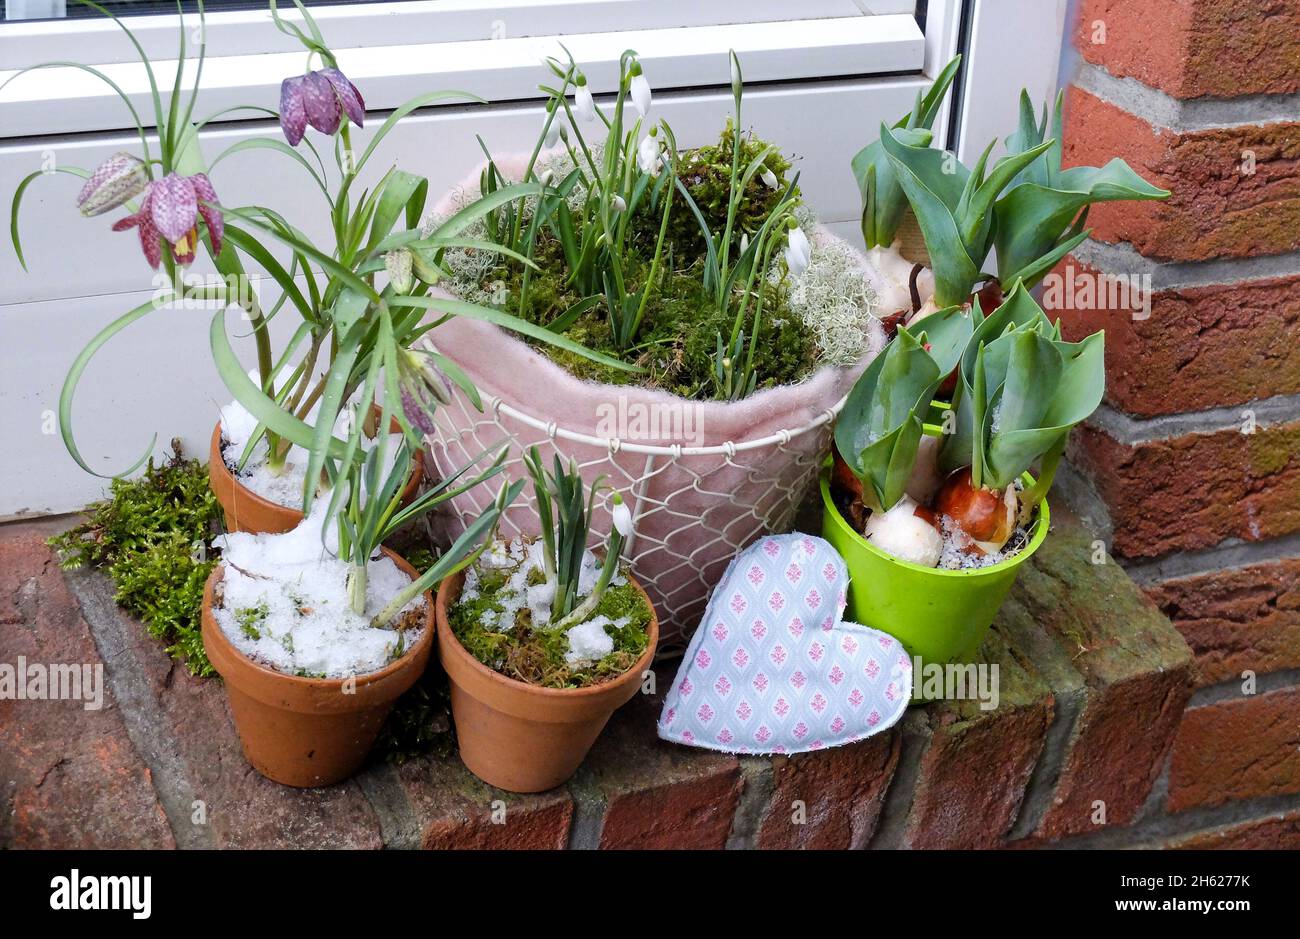 snowdrops (galanthus nivalis) and checkerboard flowers (fritillaria meleagris) on the windowsill Stock Photo